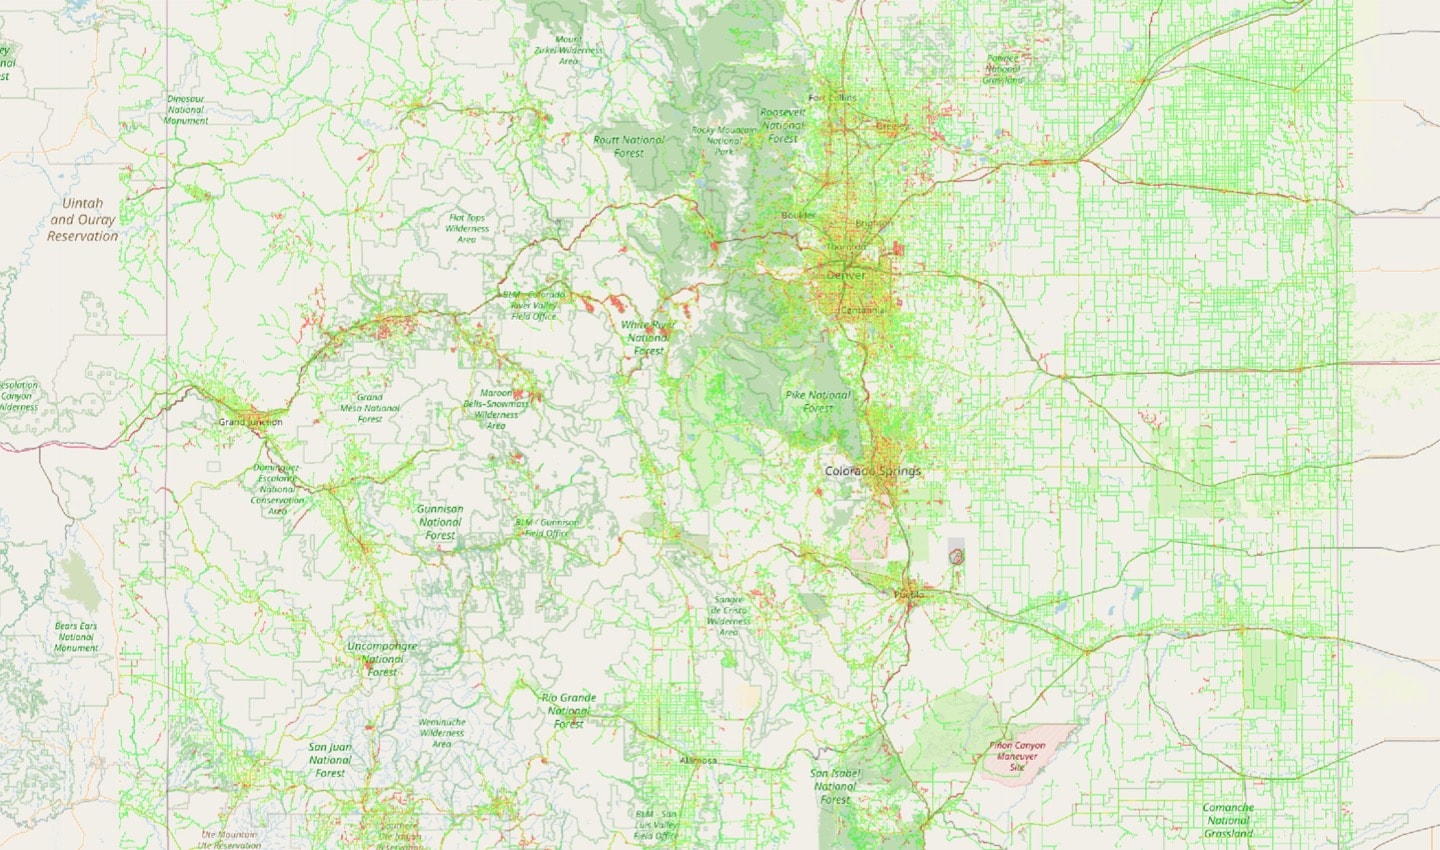 The OSM map overlaid with billions of GPS signal traces. The areas in red represent potential map errors.